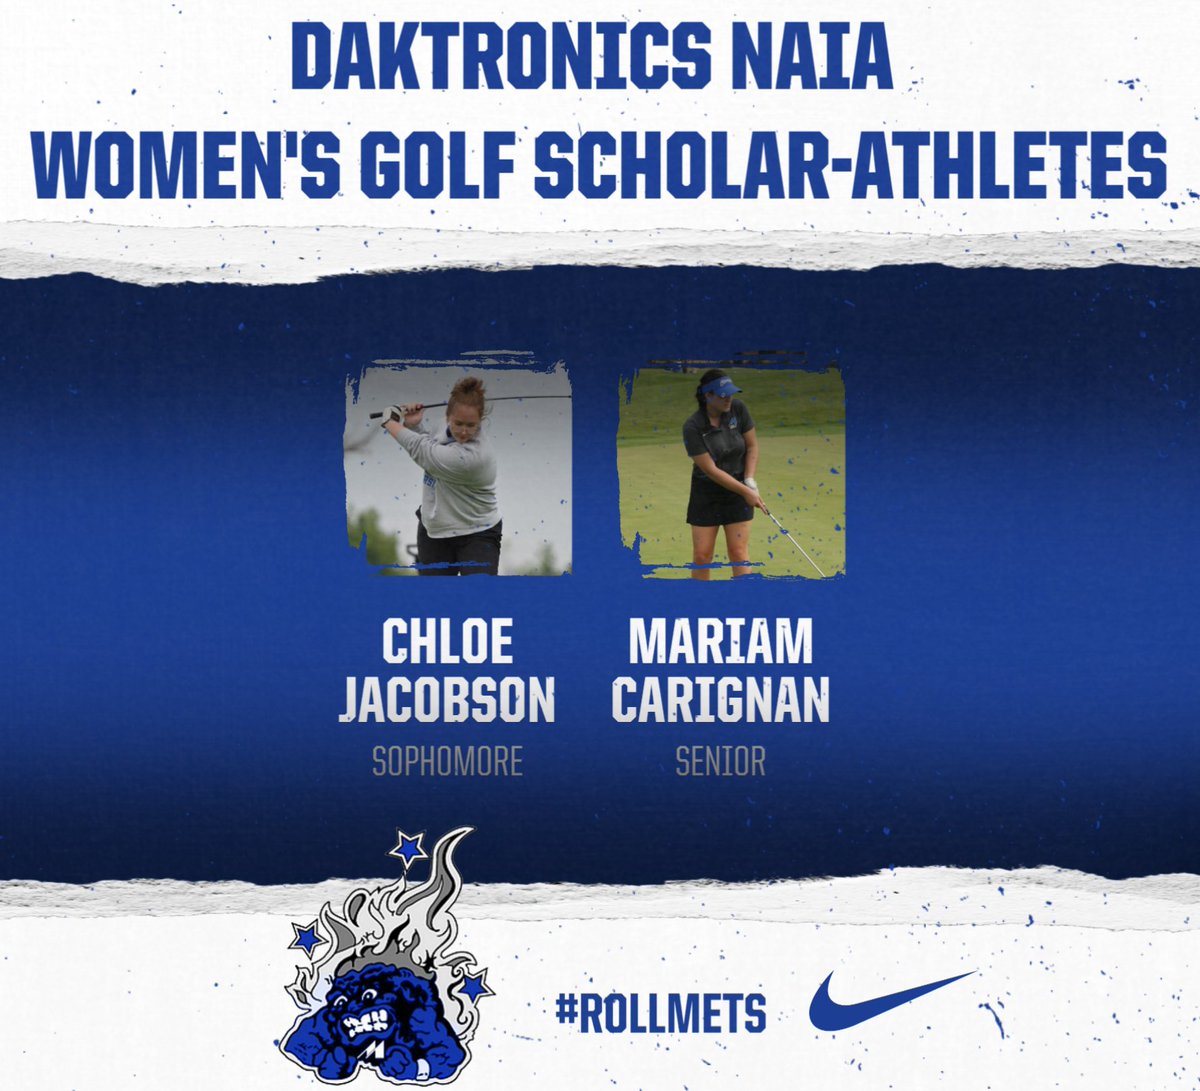 ⛳️| Congratulations to Chloe & Mariam for being named to the NAIA WGolf Scholar-Athlete List!